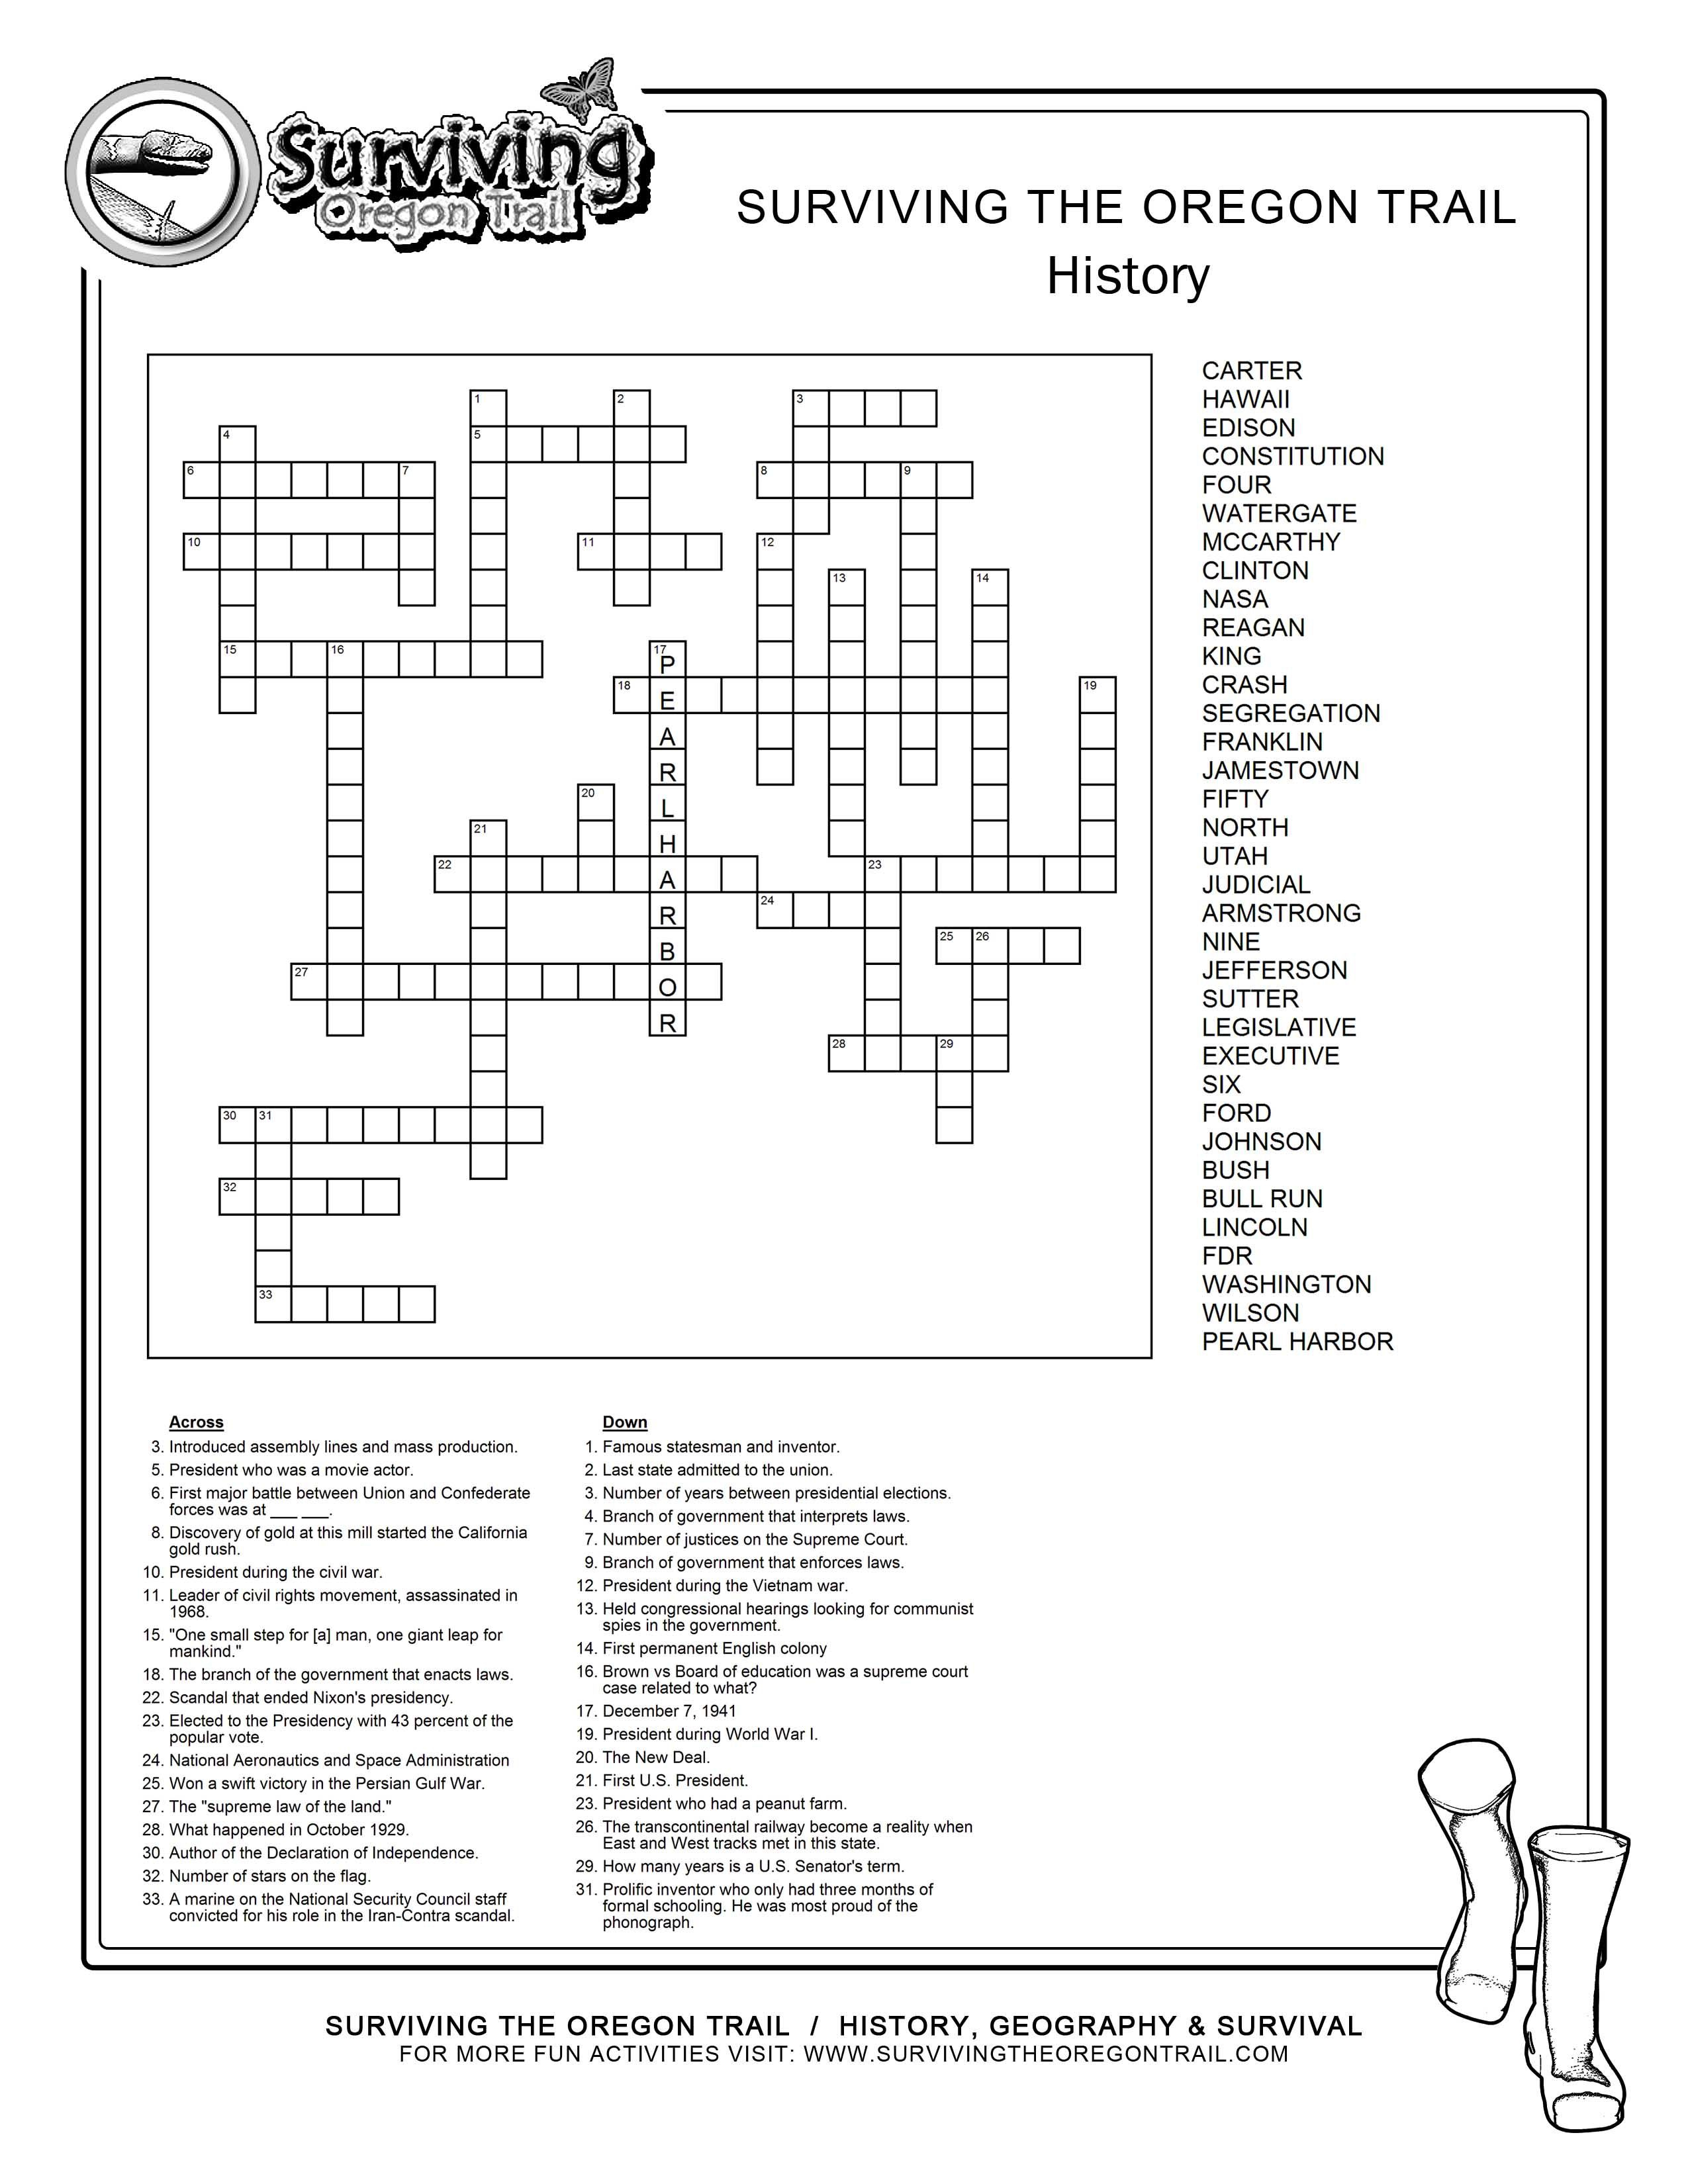 Fill Free To Save This Historical Crossword Puzzle To Your Computer - Printable History Crossword Puzzles